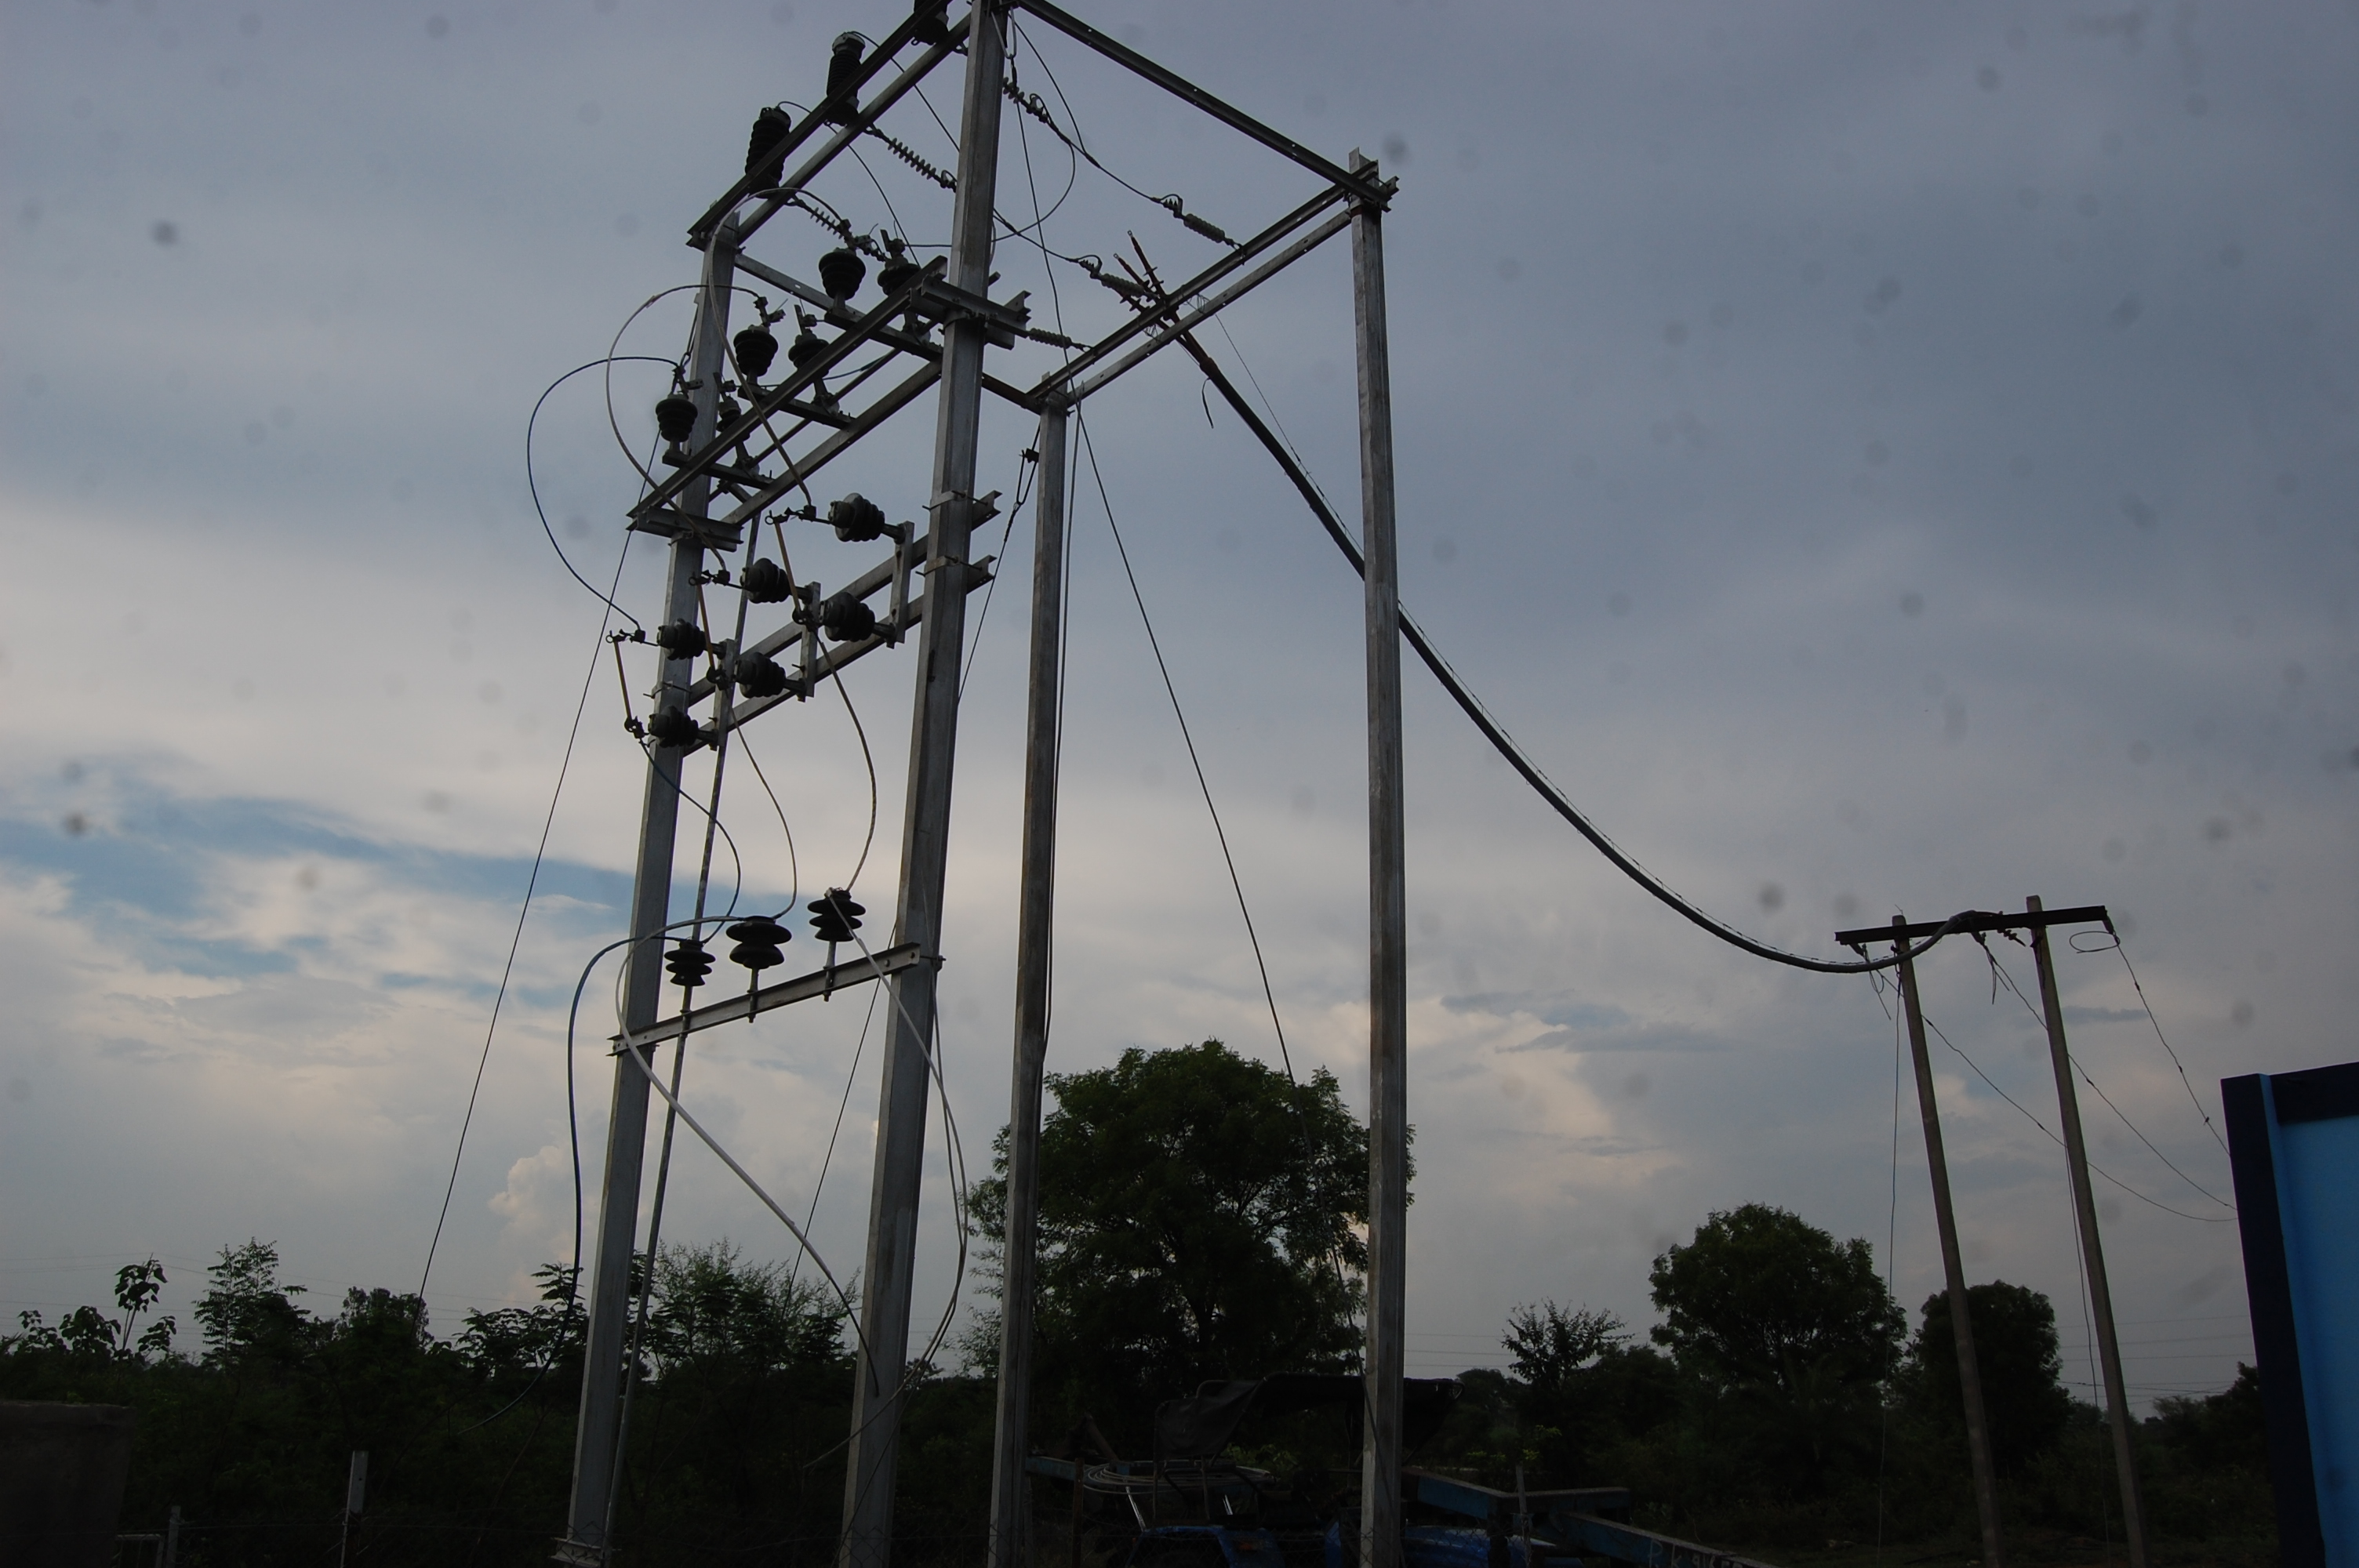 electricity problems in rural area of udaipur district